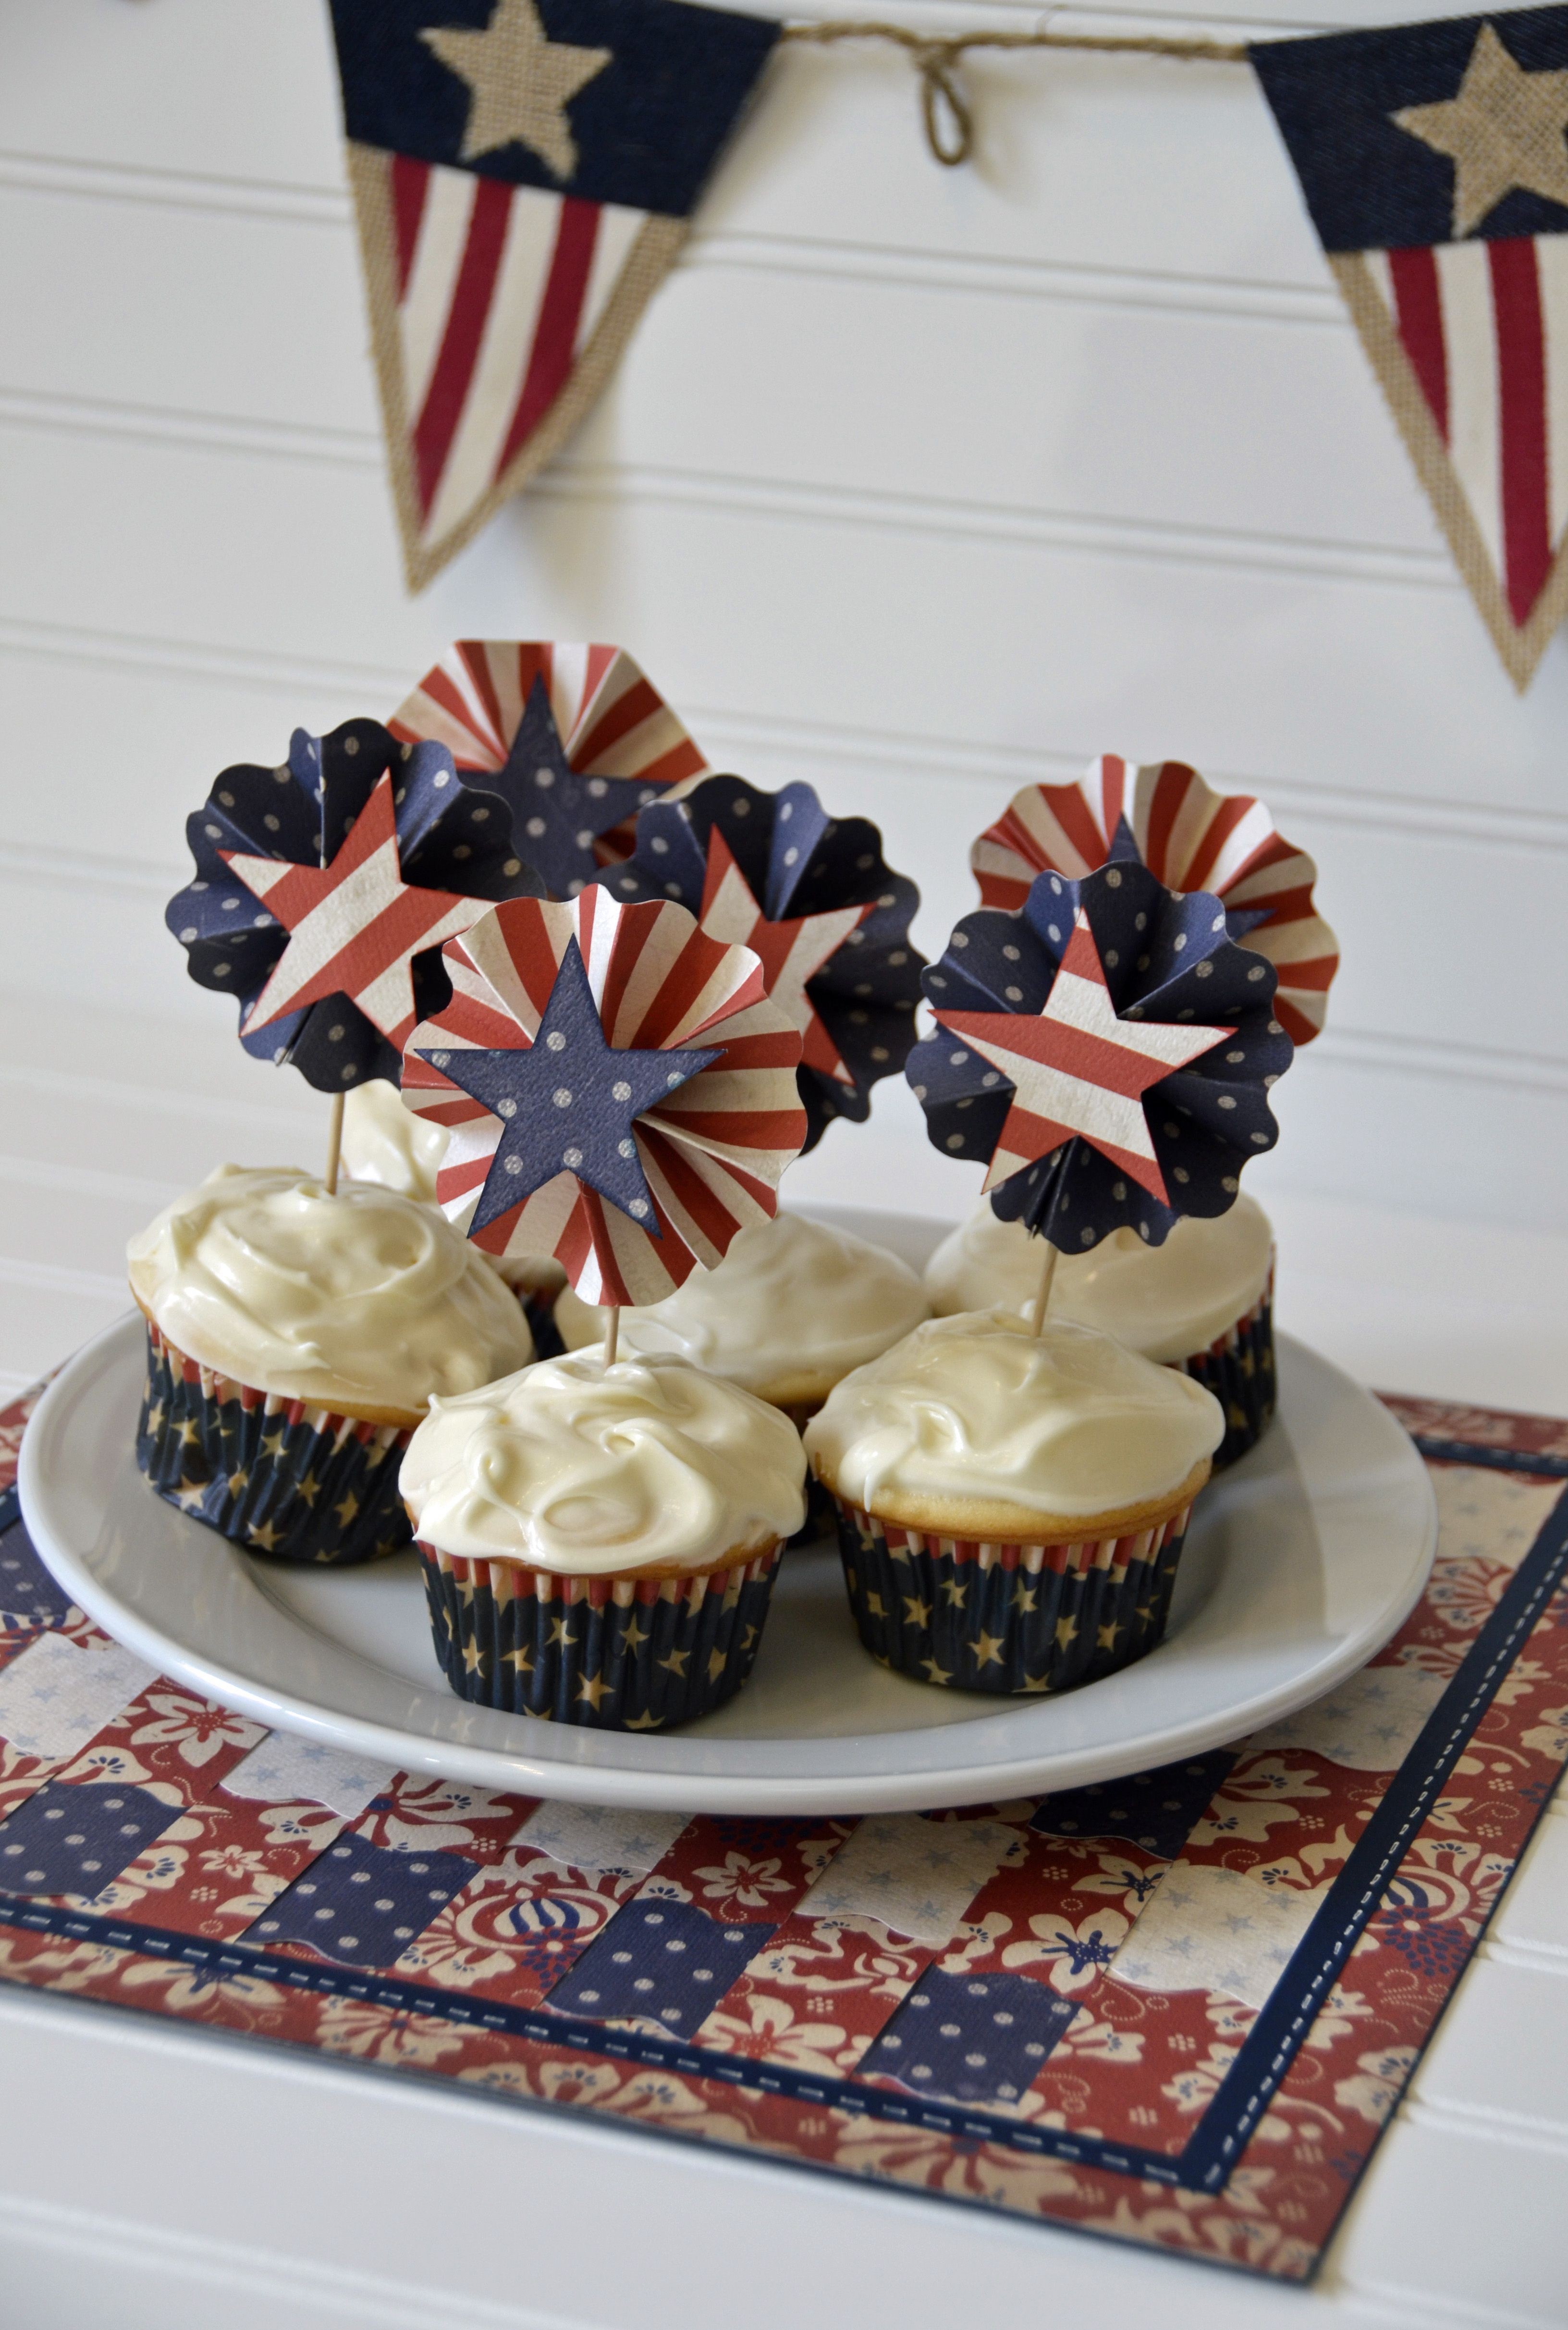 Papercraft Cupcake Patriotic Cupcake topper and Woven Placement Created by Erin